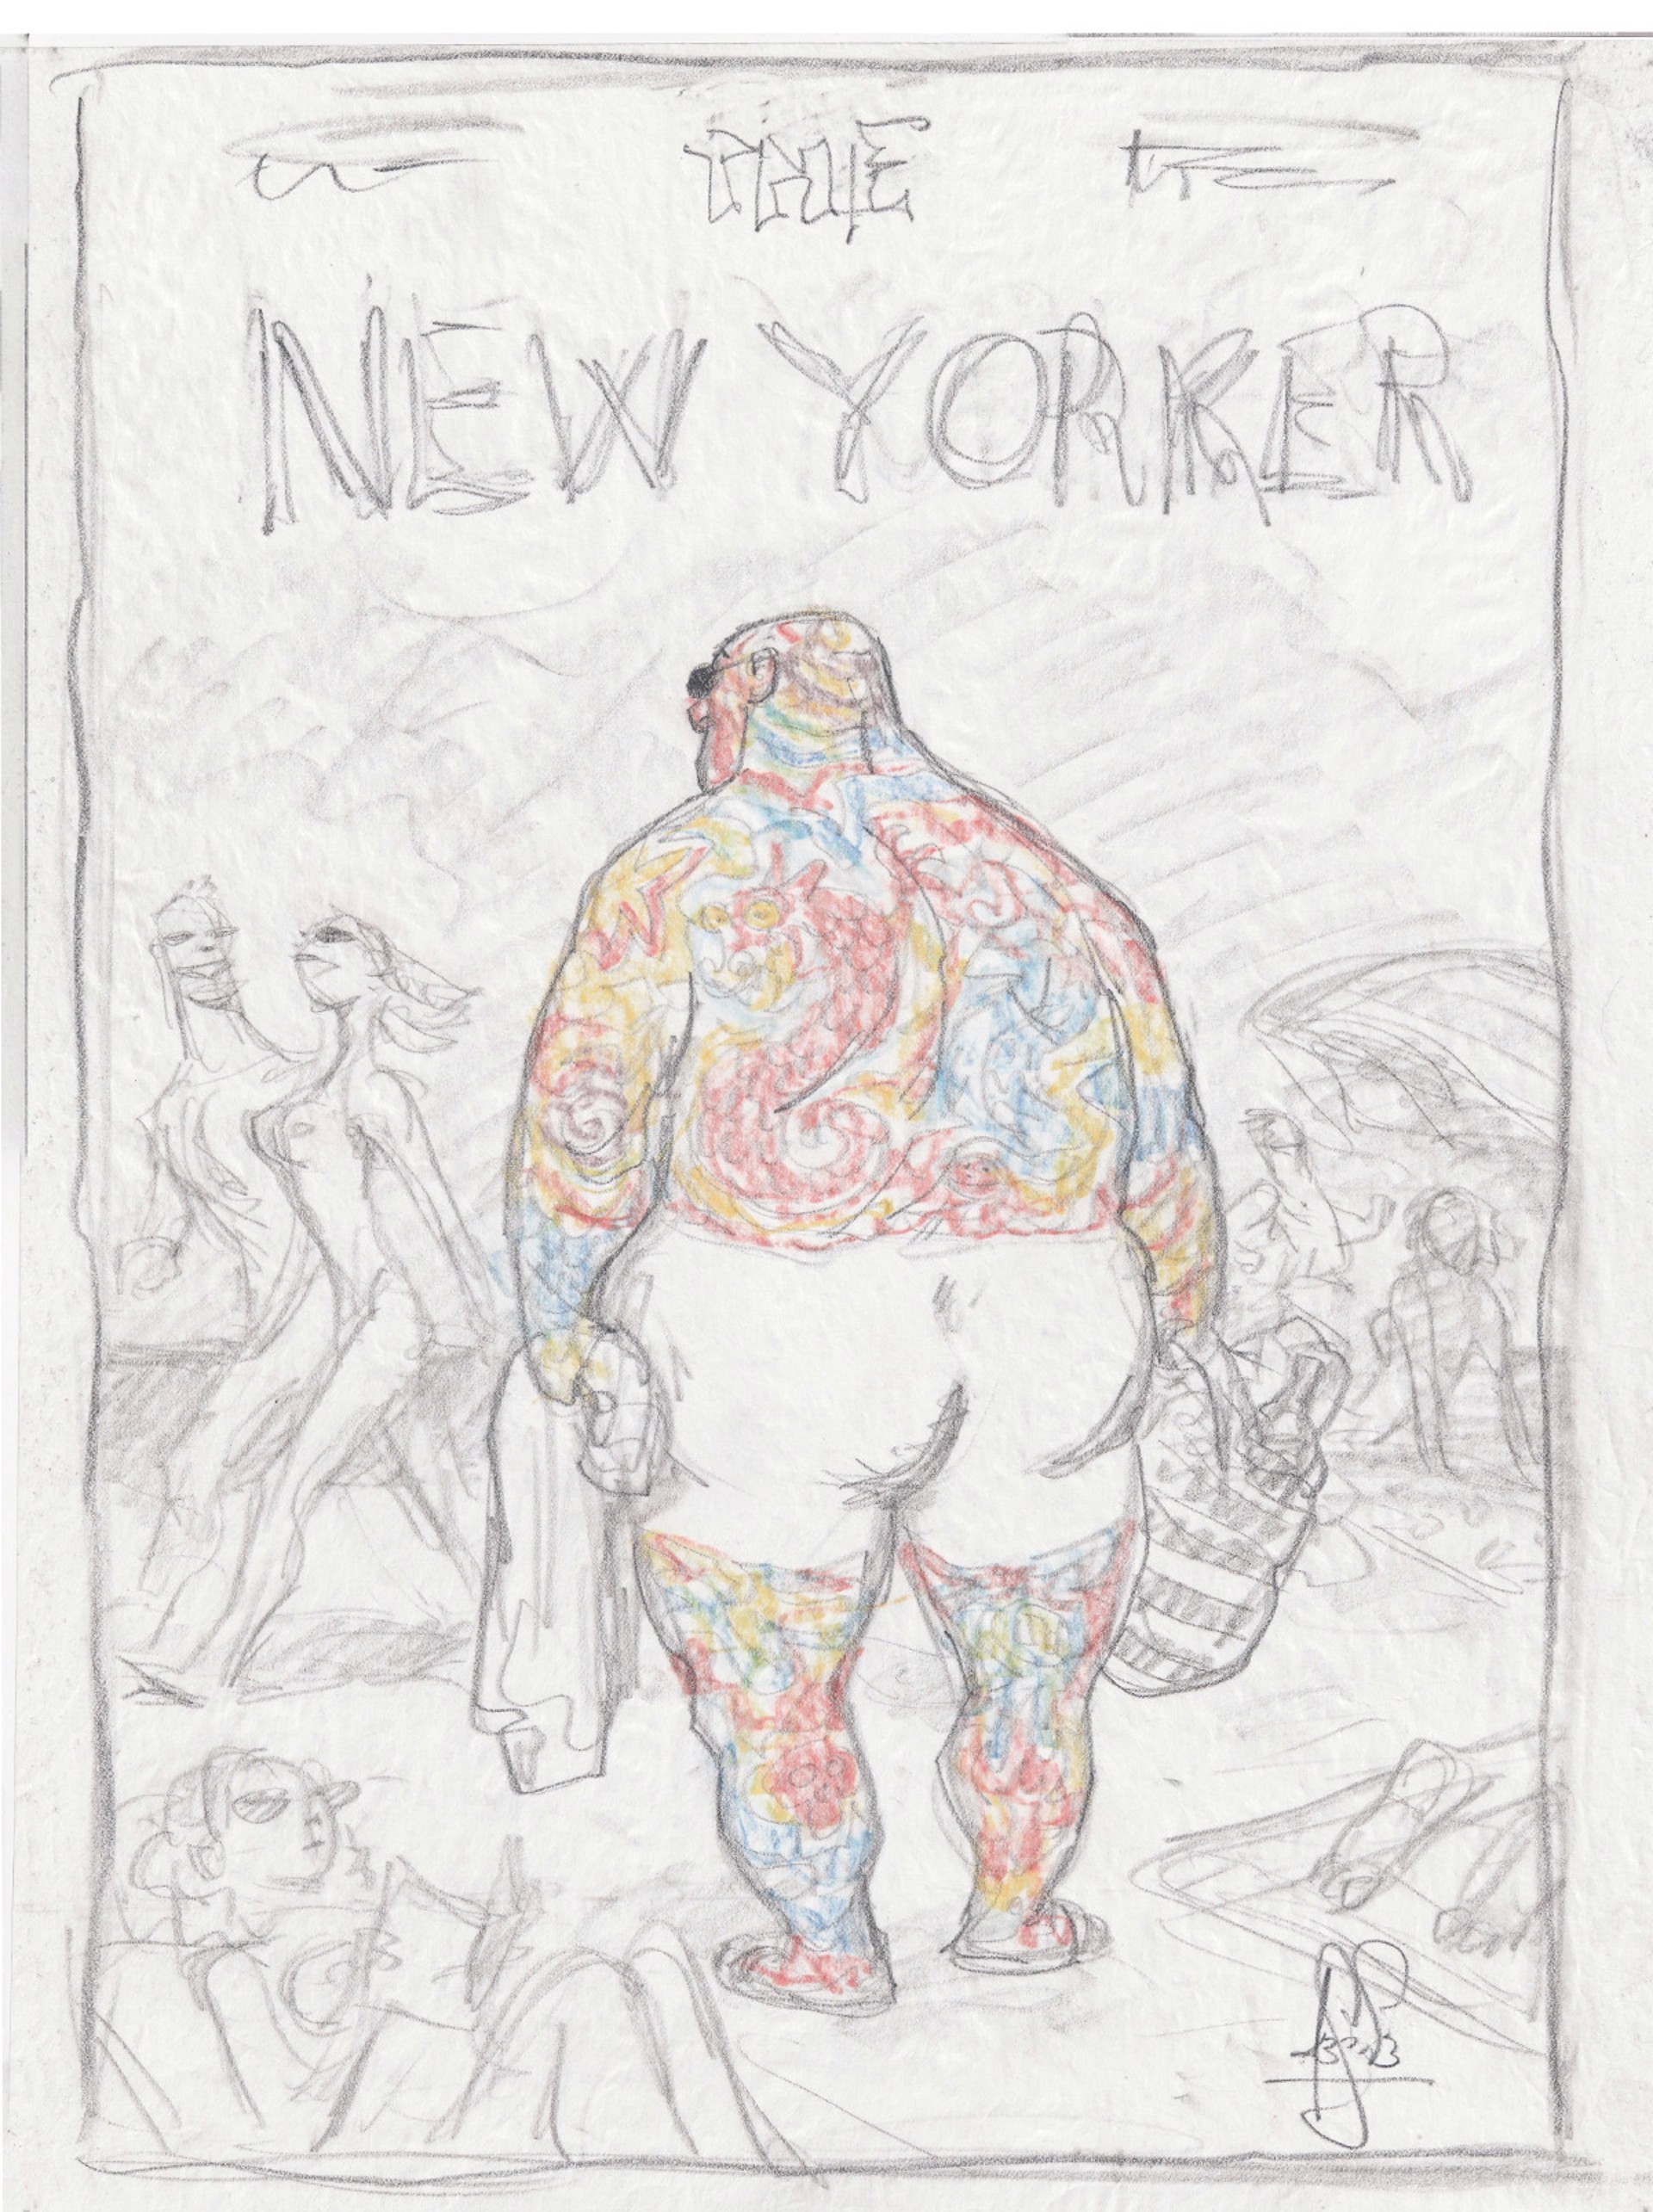 Proposed sketch for New Yorker Cover "Beach Bum" by Peter de Sève